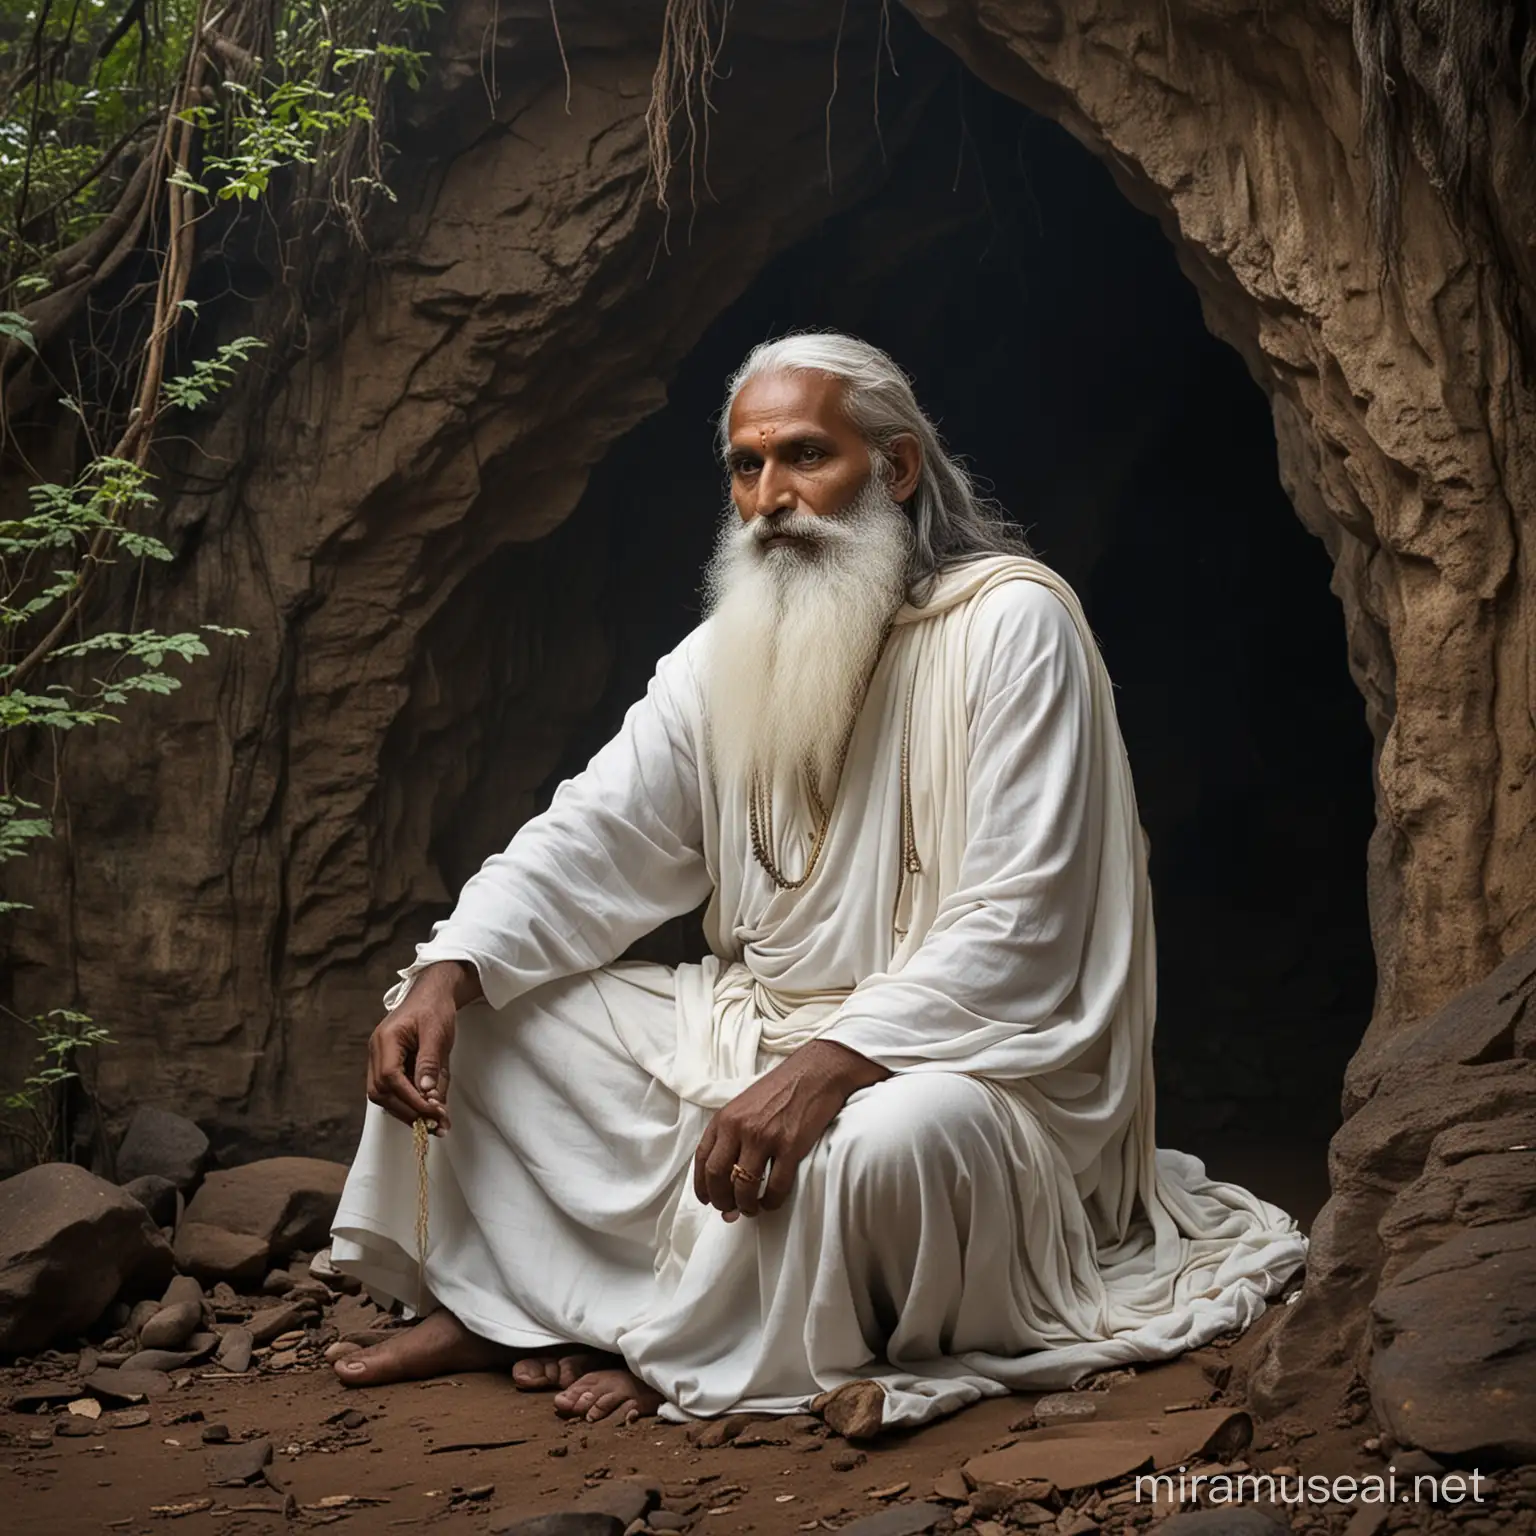 an indian saint  sitting in a dark forest cave, he has white and long long beard touching the ground